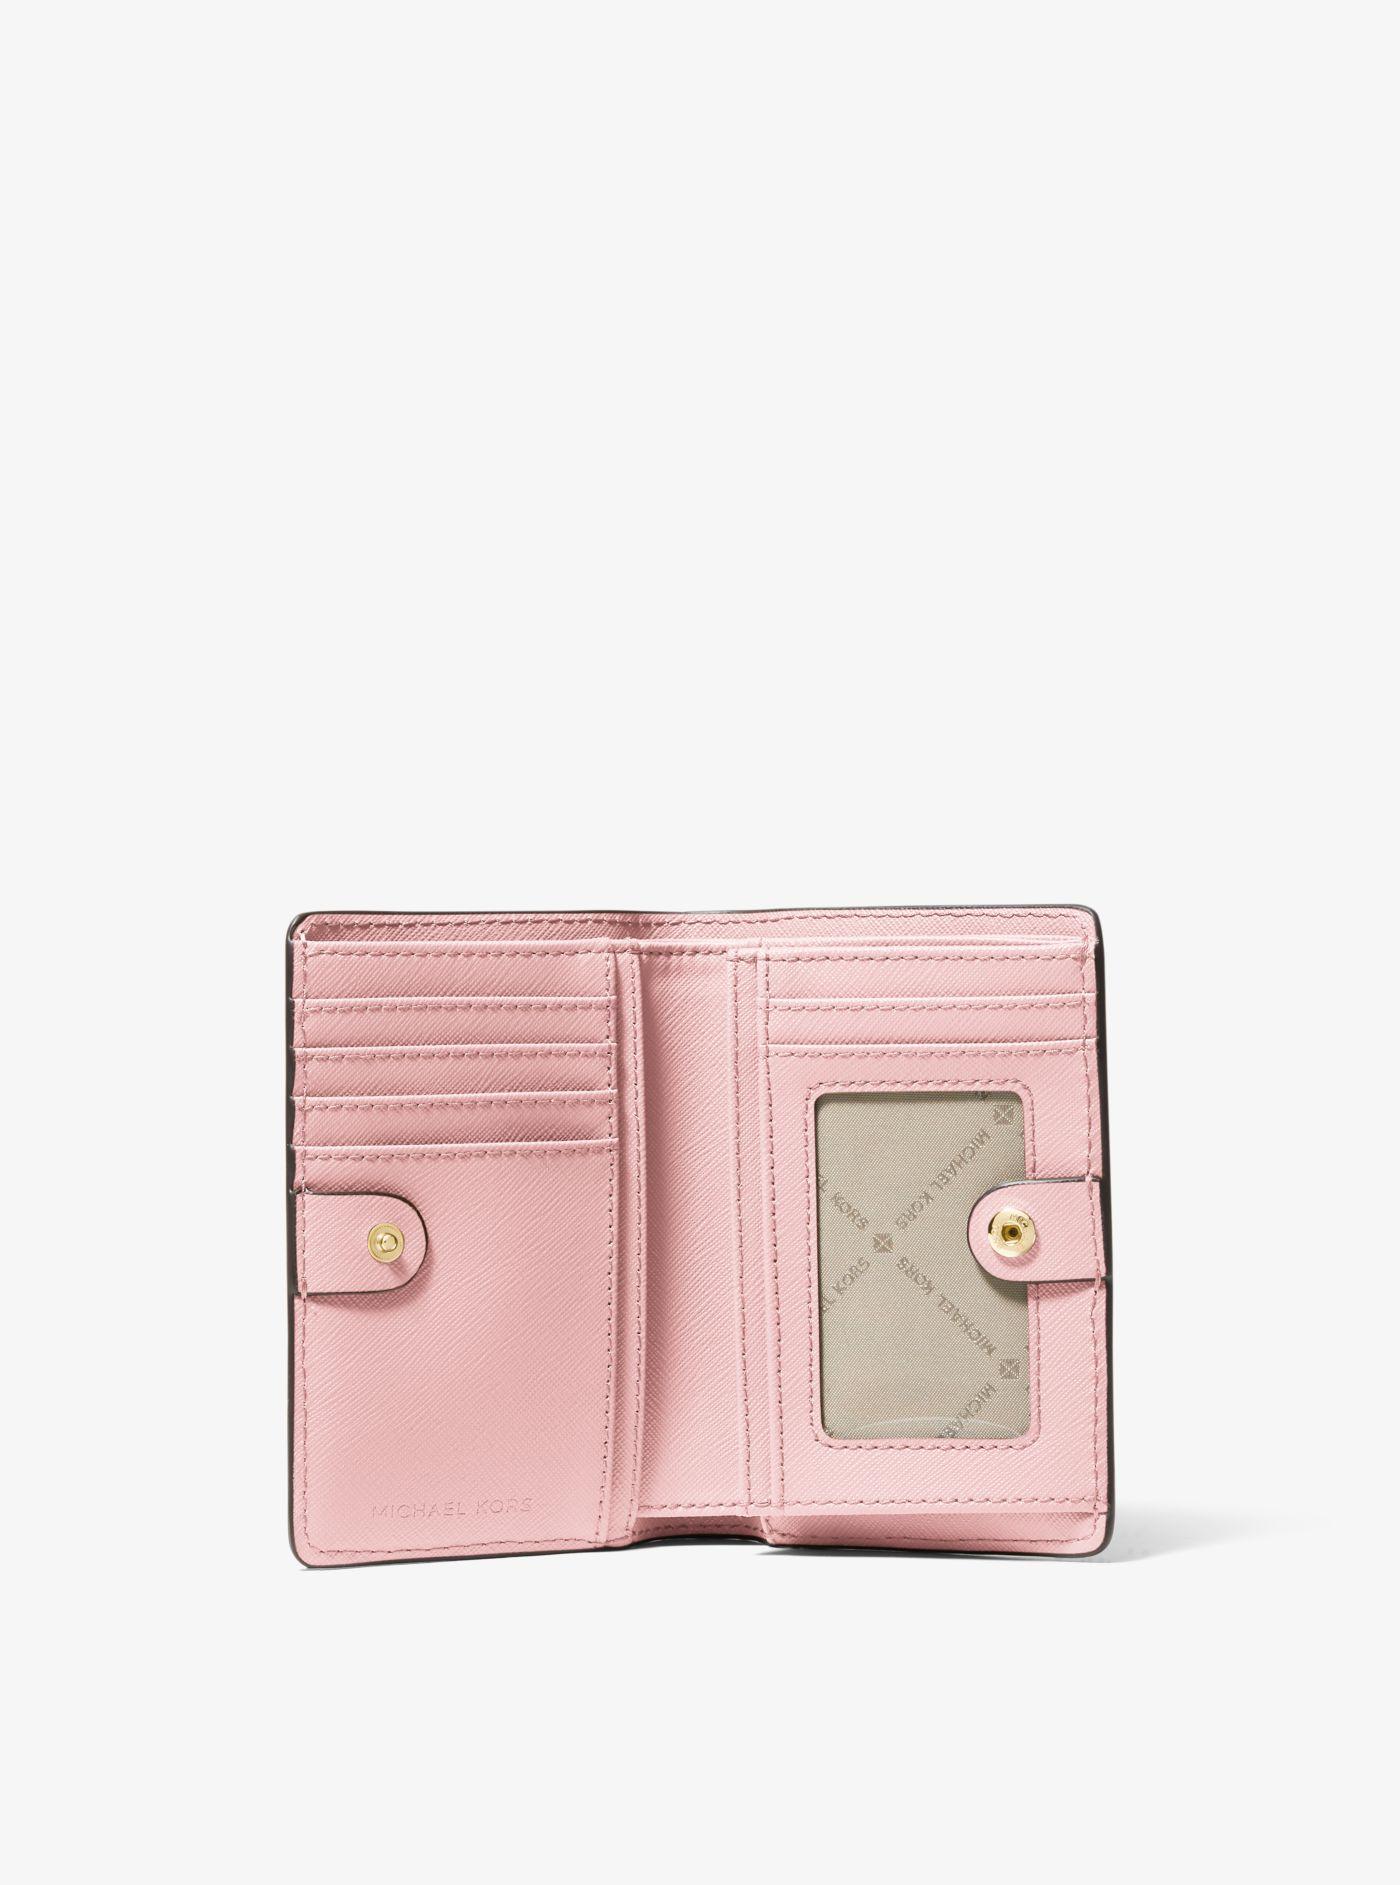 At redigere Genre fjende Michael Kors Small Two-tone Crossgrain Leather Wallet in Powder Blush  (Pink) - Lyst